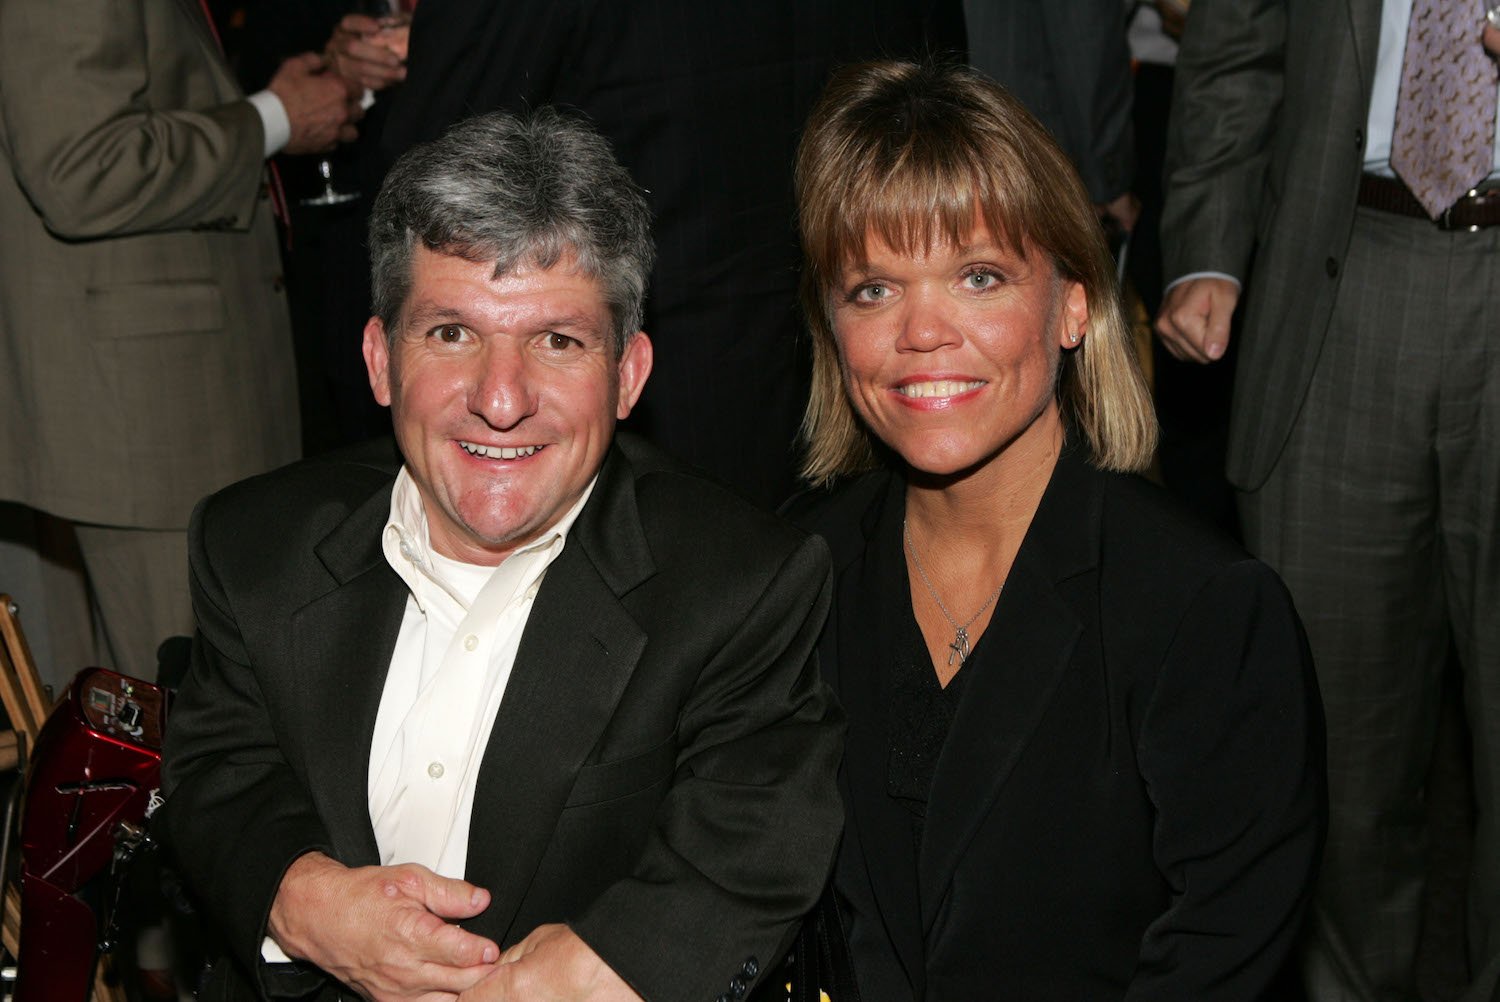 'Little People, Big World' stars Matt and Amy Roloff sitting next to each other and smiling